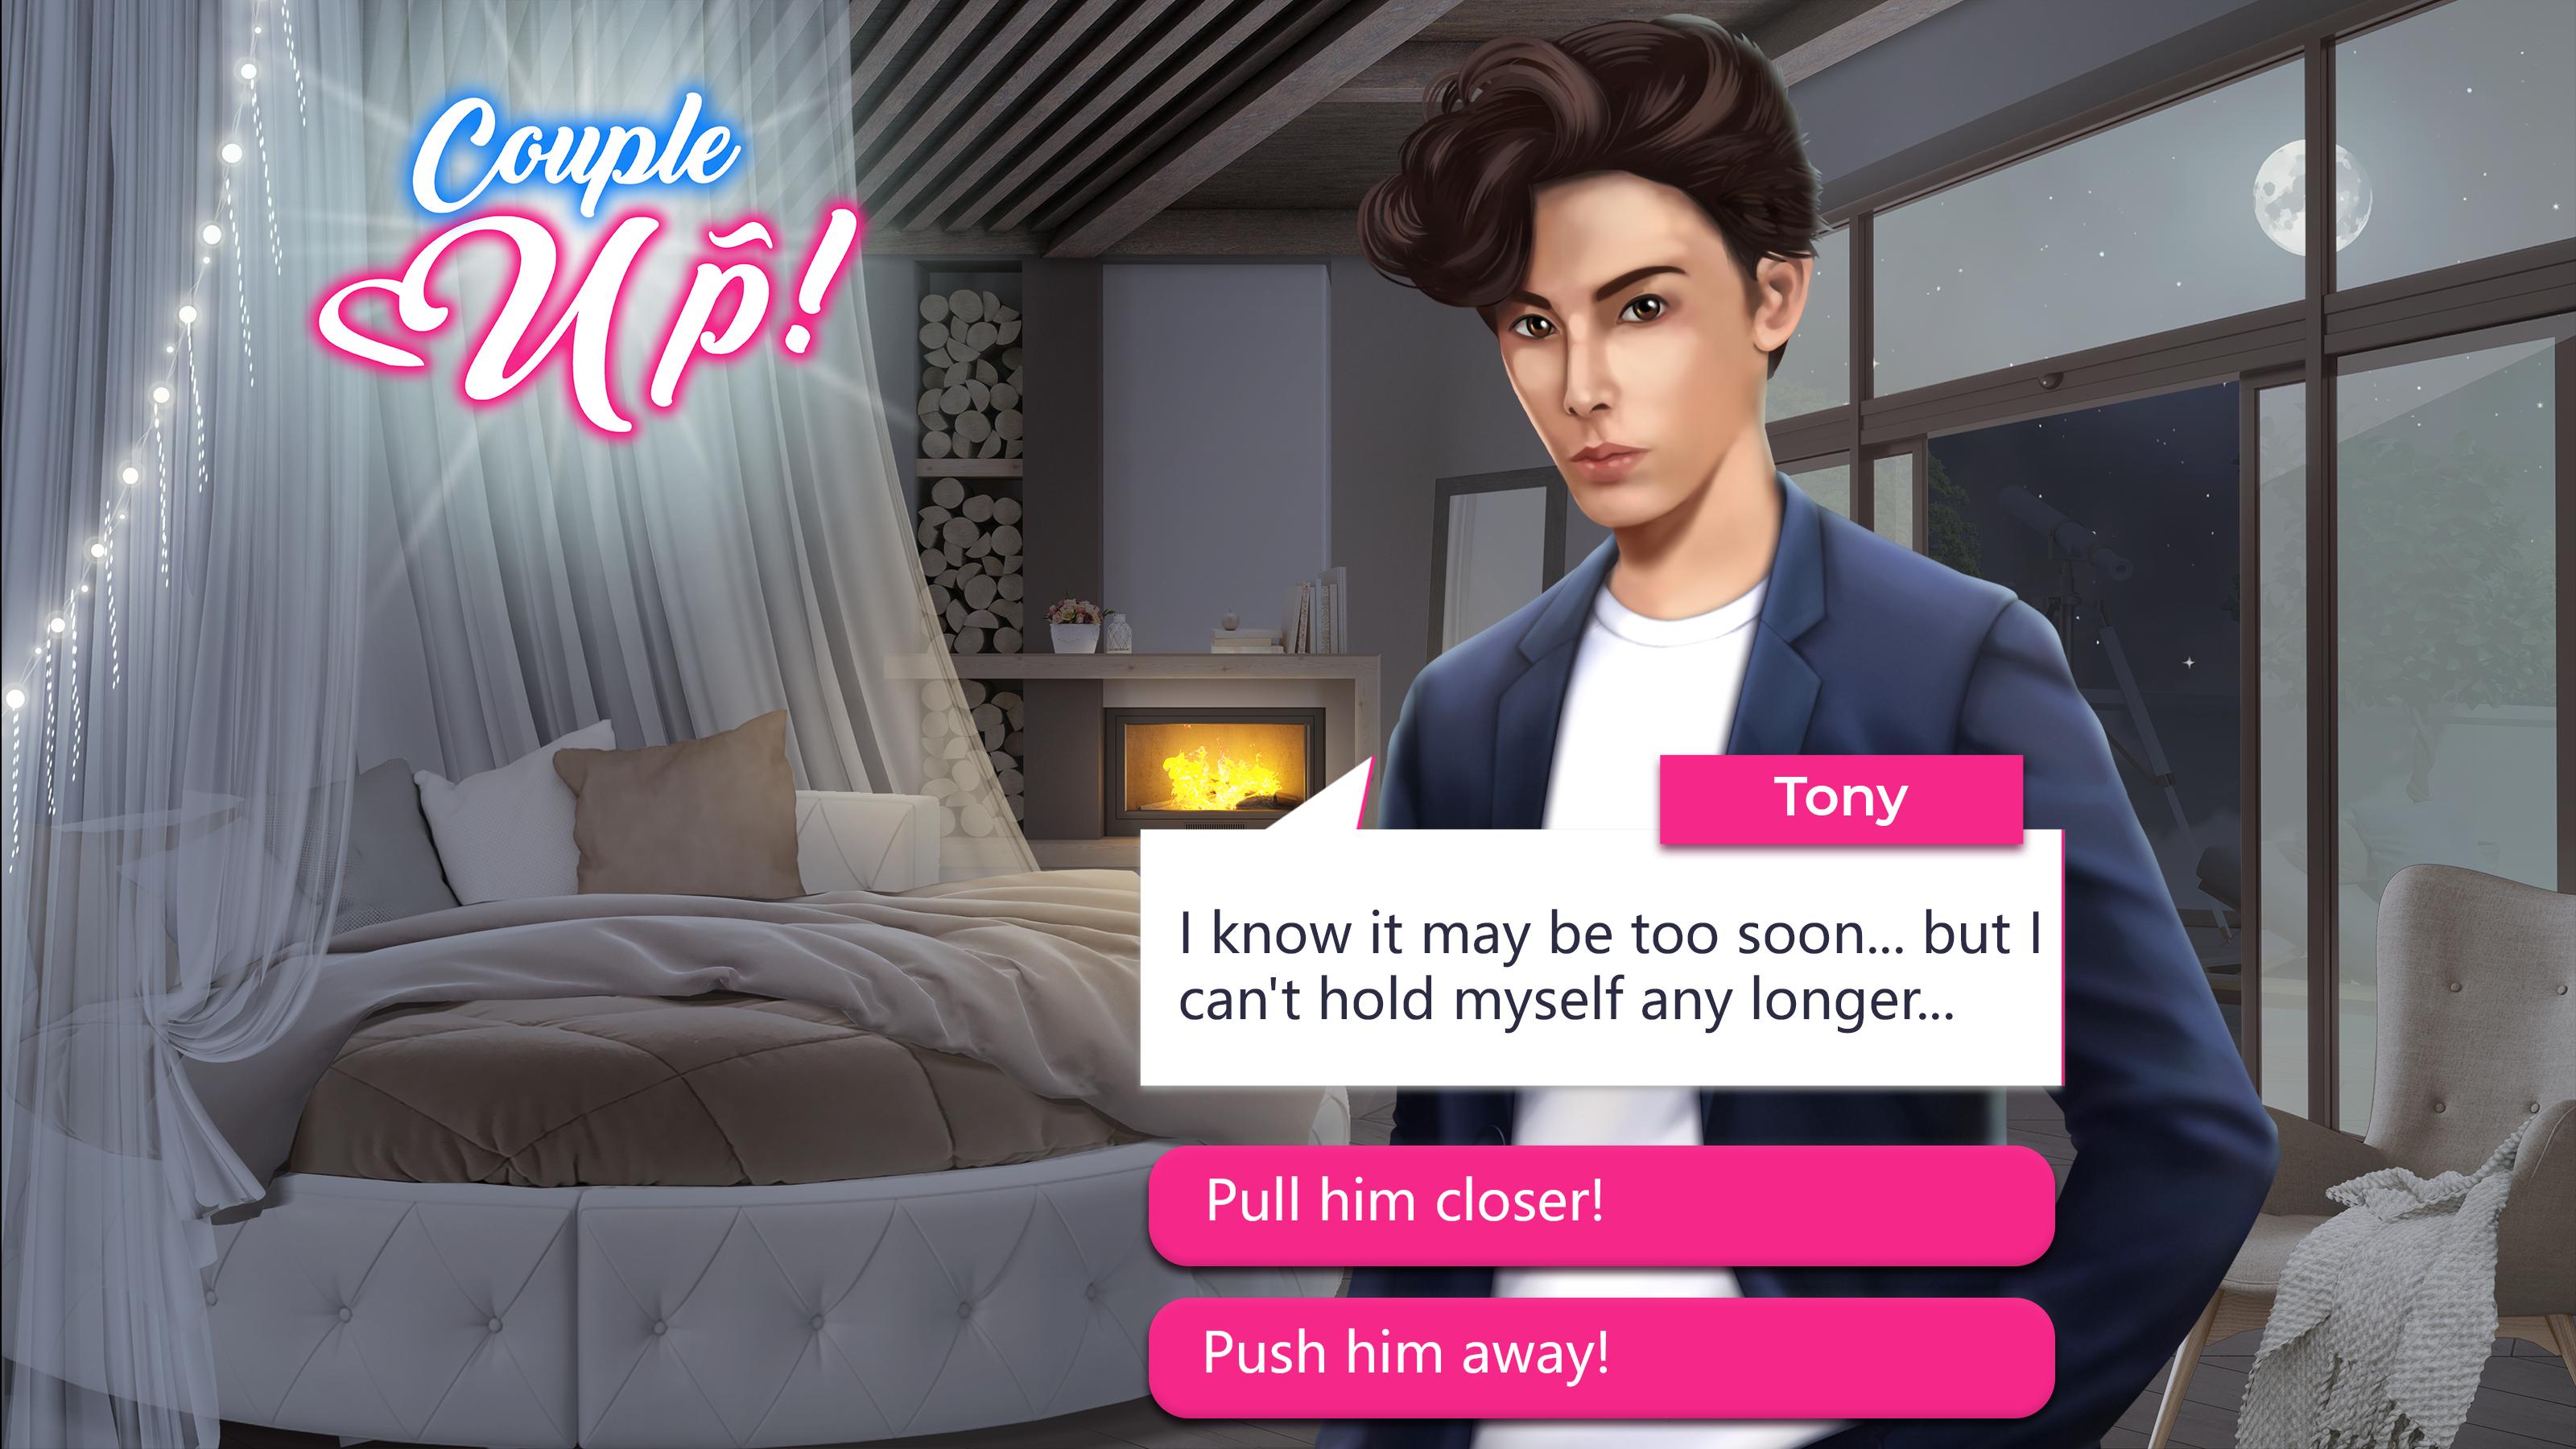 Couple Up! Love Show - Interactive Story 0.7.5 Screenshot 14